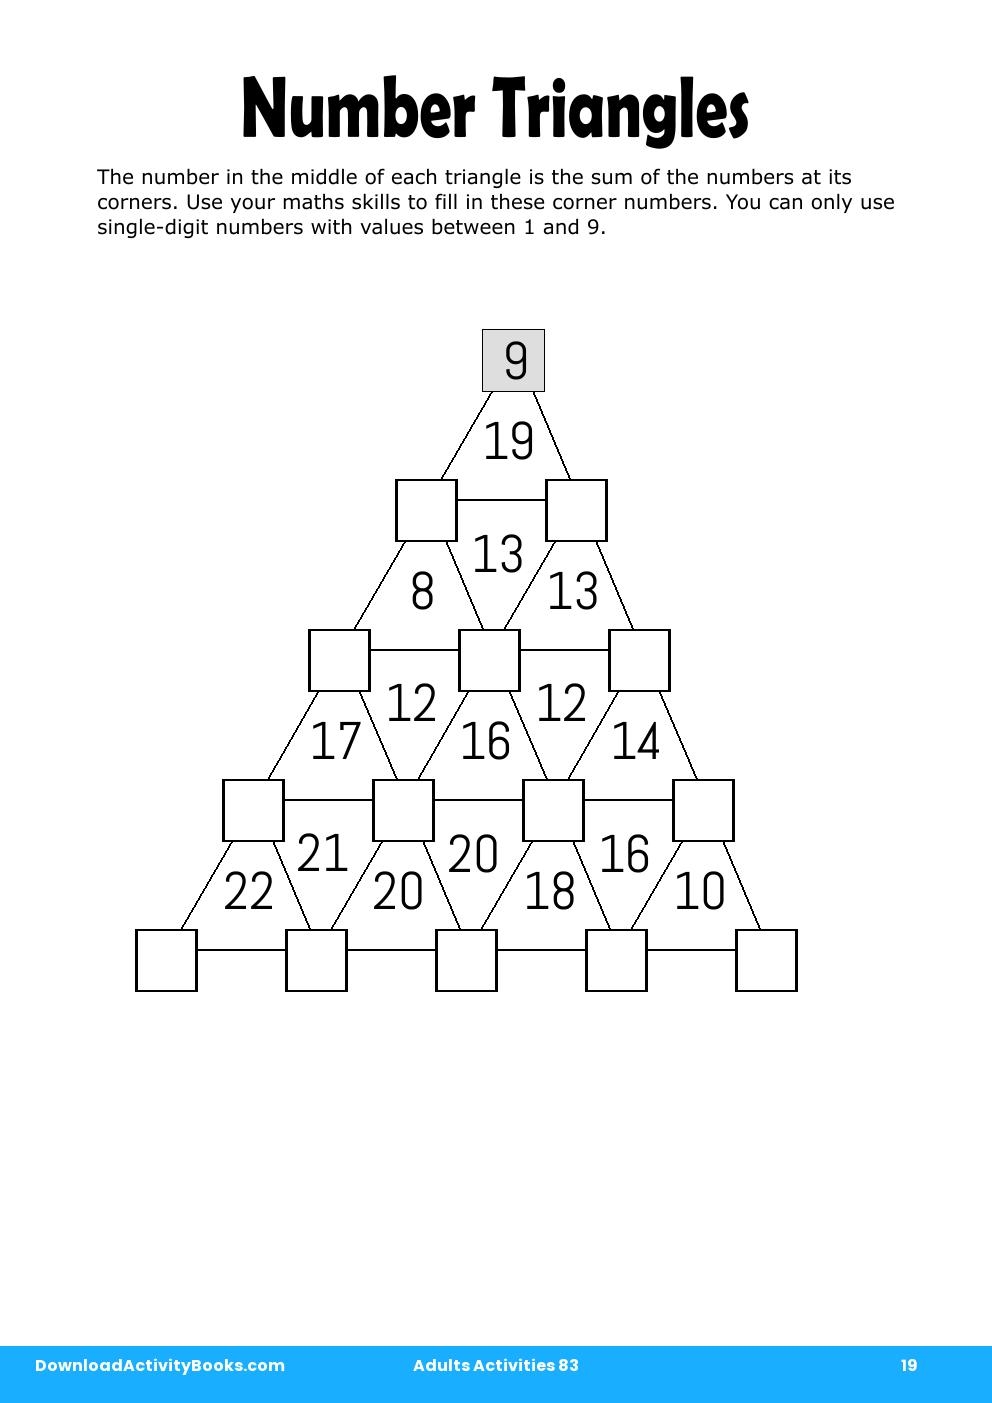 Number Triangles in Adults Activities 83